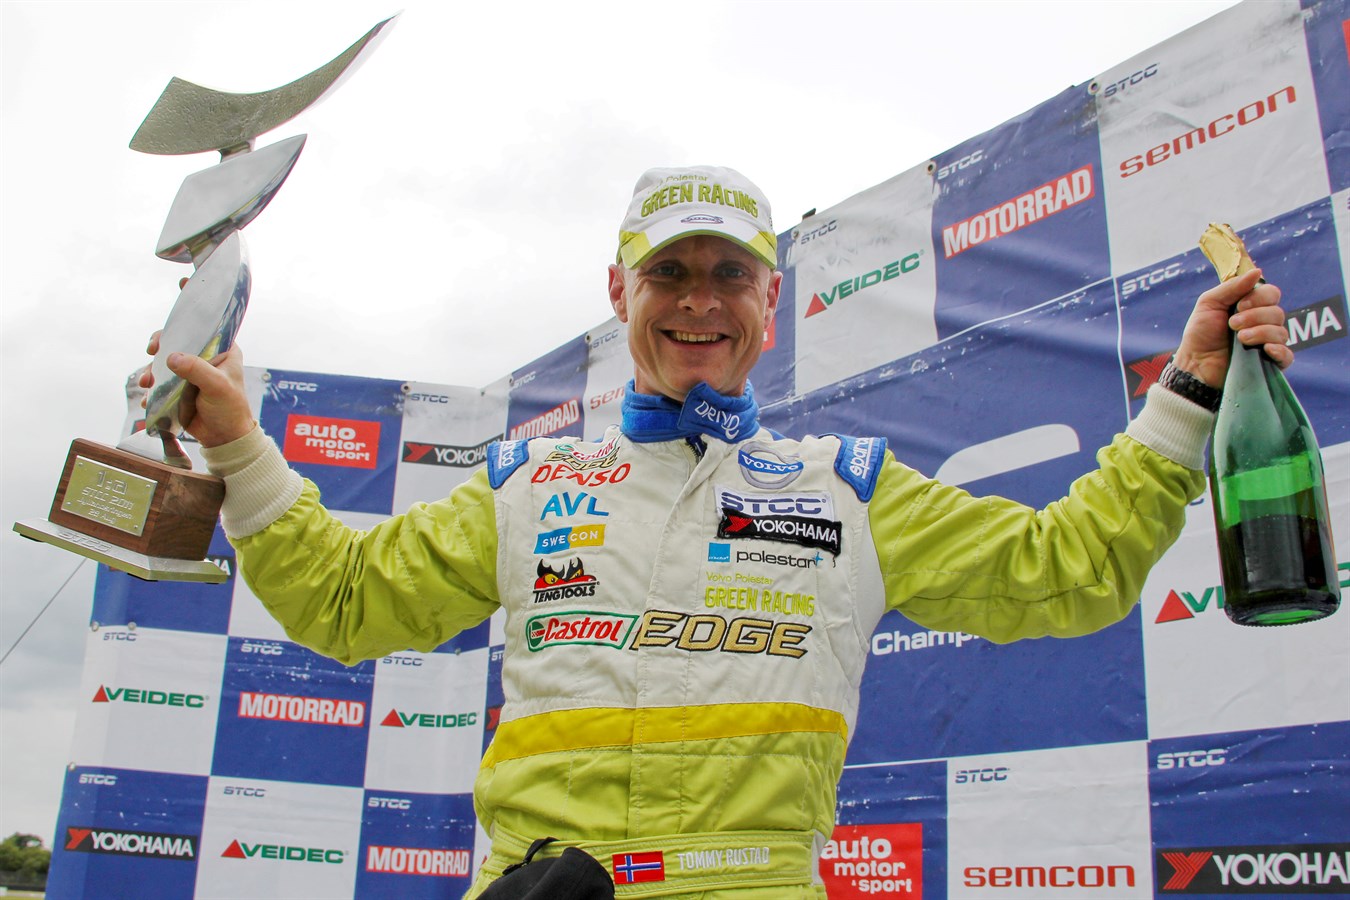 Tommy Rustad secures the first STCC (Scandinavian Touring Car Championship) victory of 2011.